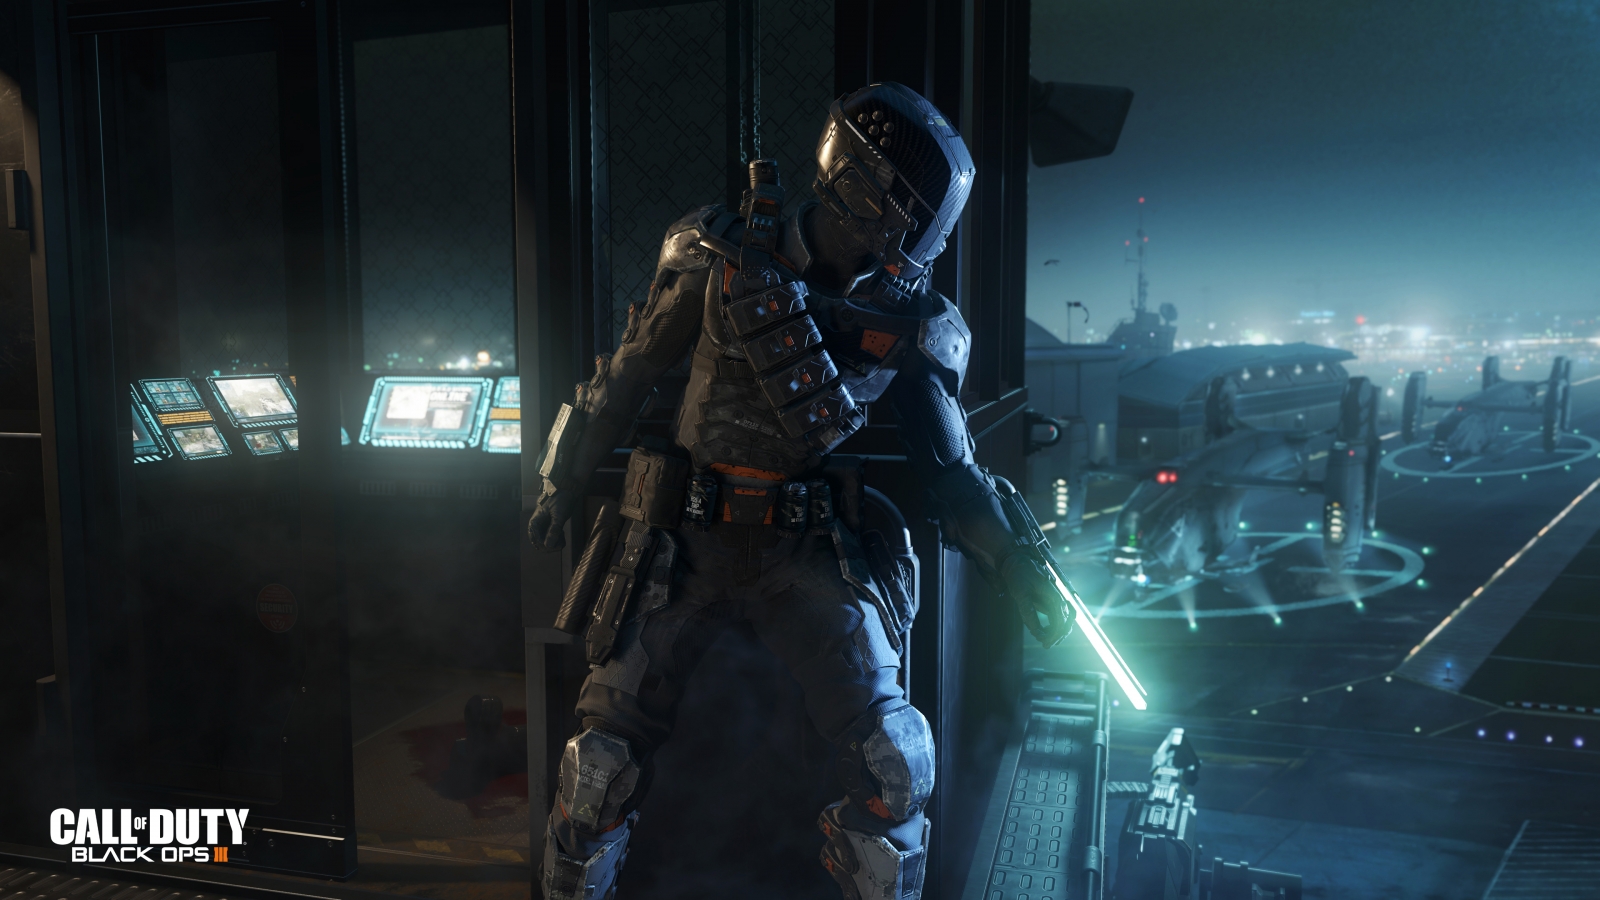 Call of Duty Black Ops 3 Specialist Spectre for 1600 x 900 HDTV resolution